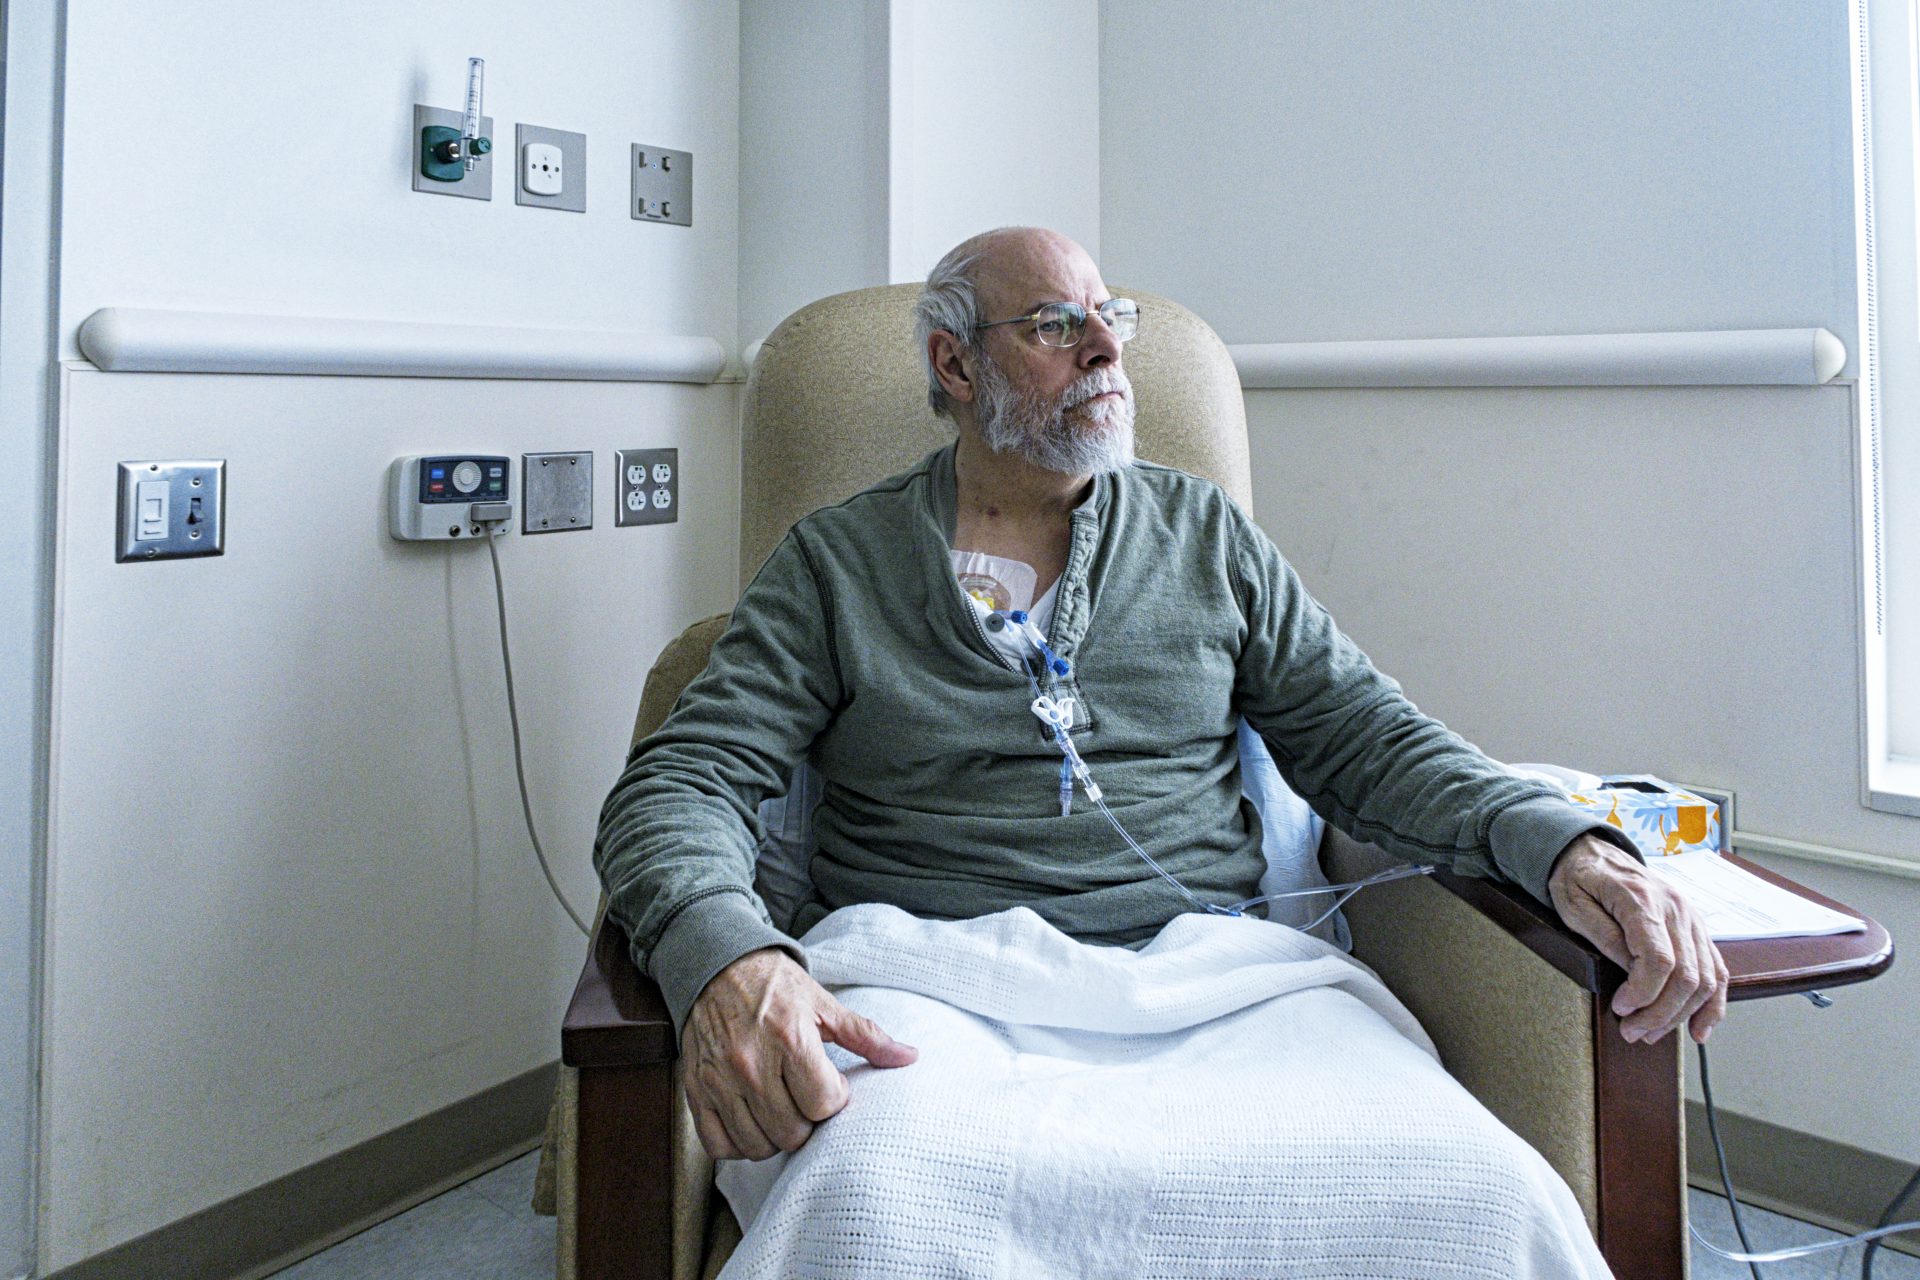 <div><span>The latest one, an American man with cancer who developed an Irish accent. Described as the first case of FAS in someone with cancer. However, the cancer was not the cause, scientists said.</span></div>